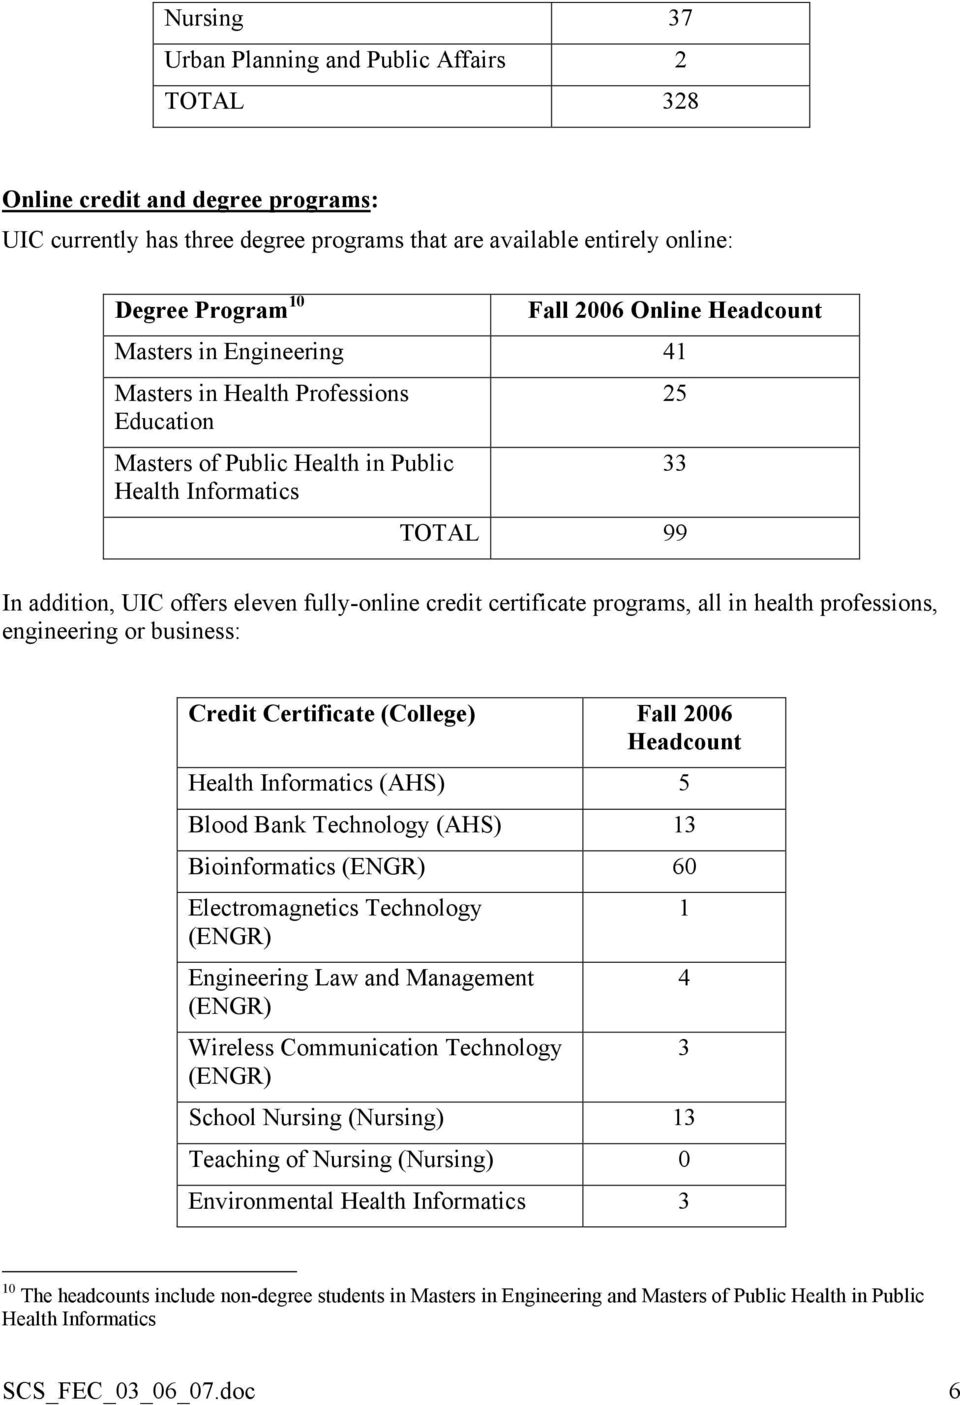 credit certificate programs, all in health professions, engineering or business: Credit Certificate (College) Fall 2006 Headcount Health Informatics (AHS) 5 Blood Bank Technology (AHS) 13